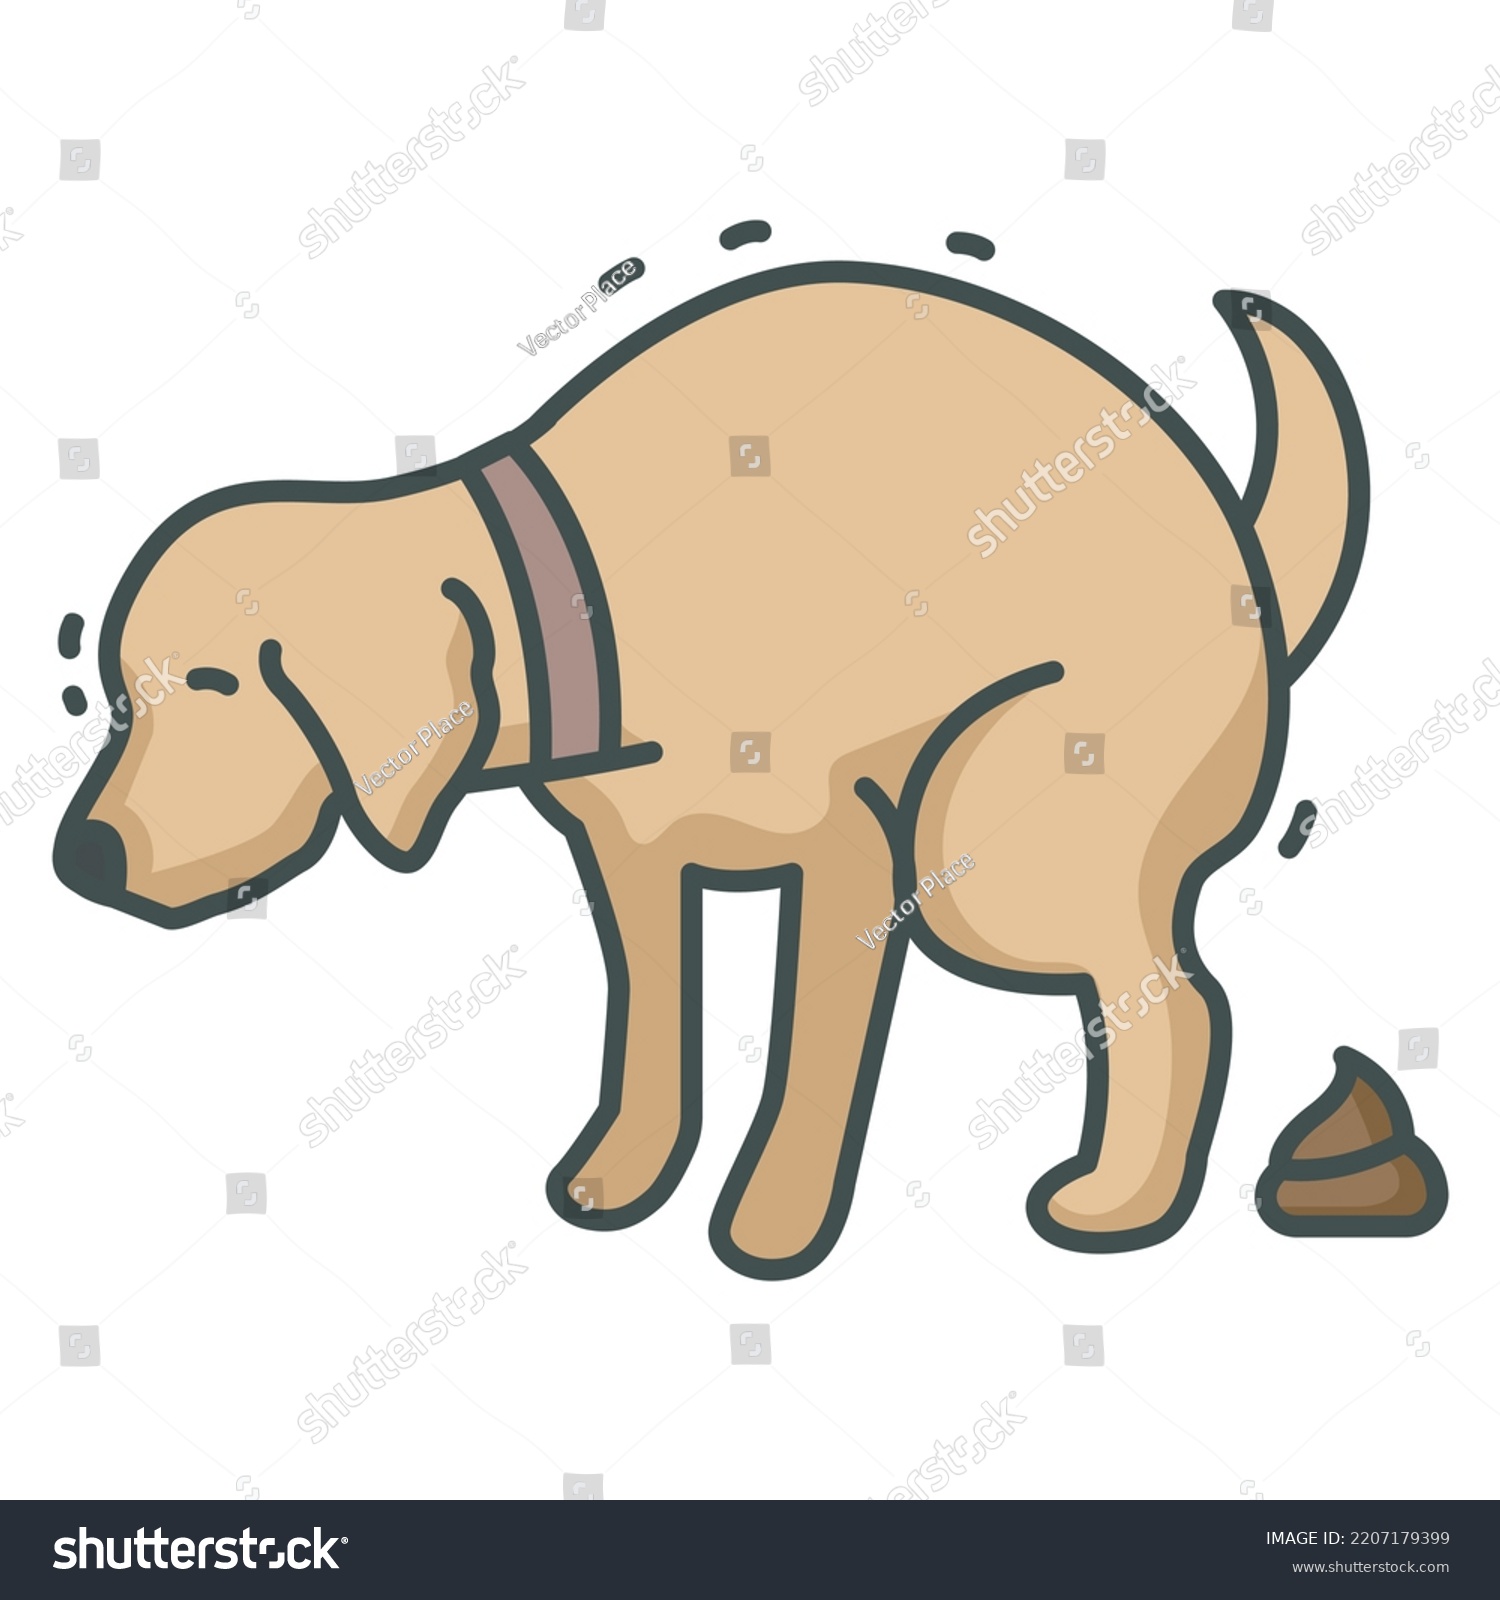 Dog Shit Vector Icon Commercial Use Stock Vector (Royalty Free ...